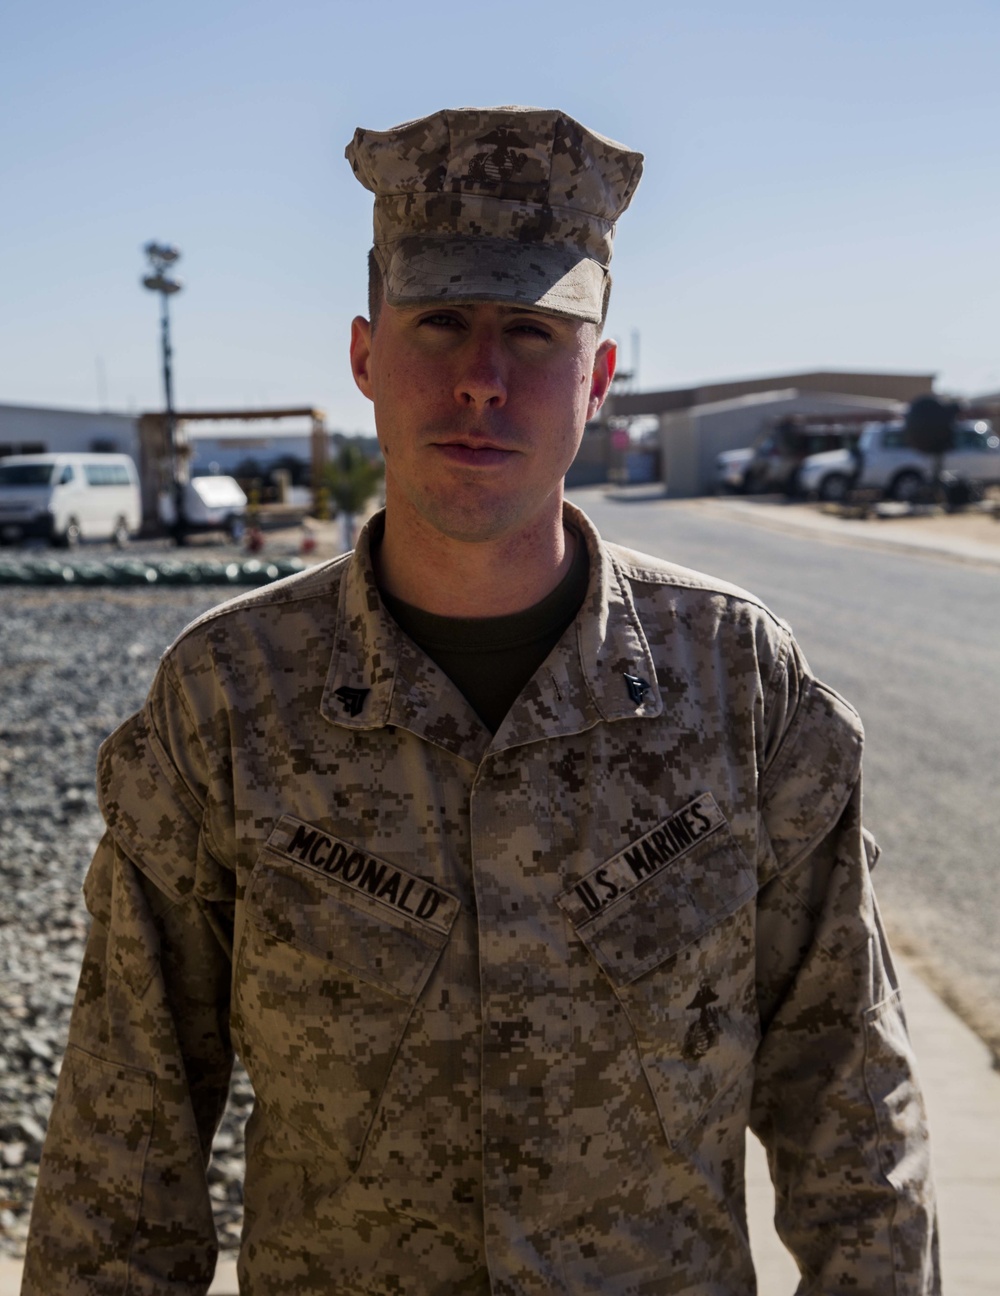 15.1 - Warrior of the Month: Marine from Orlando, Fla.